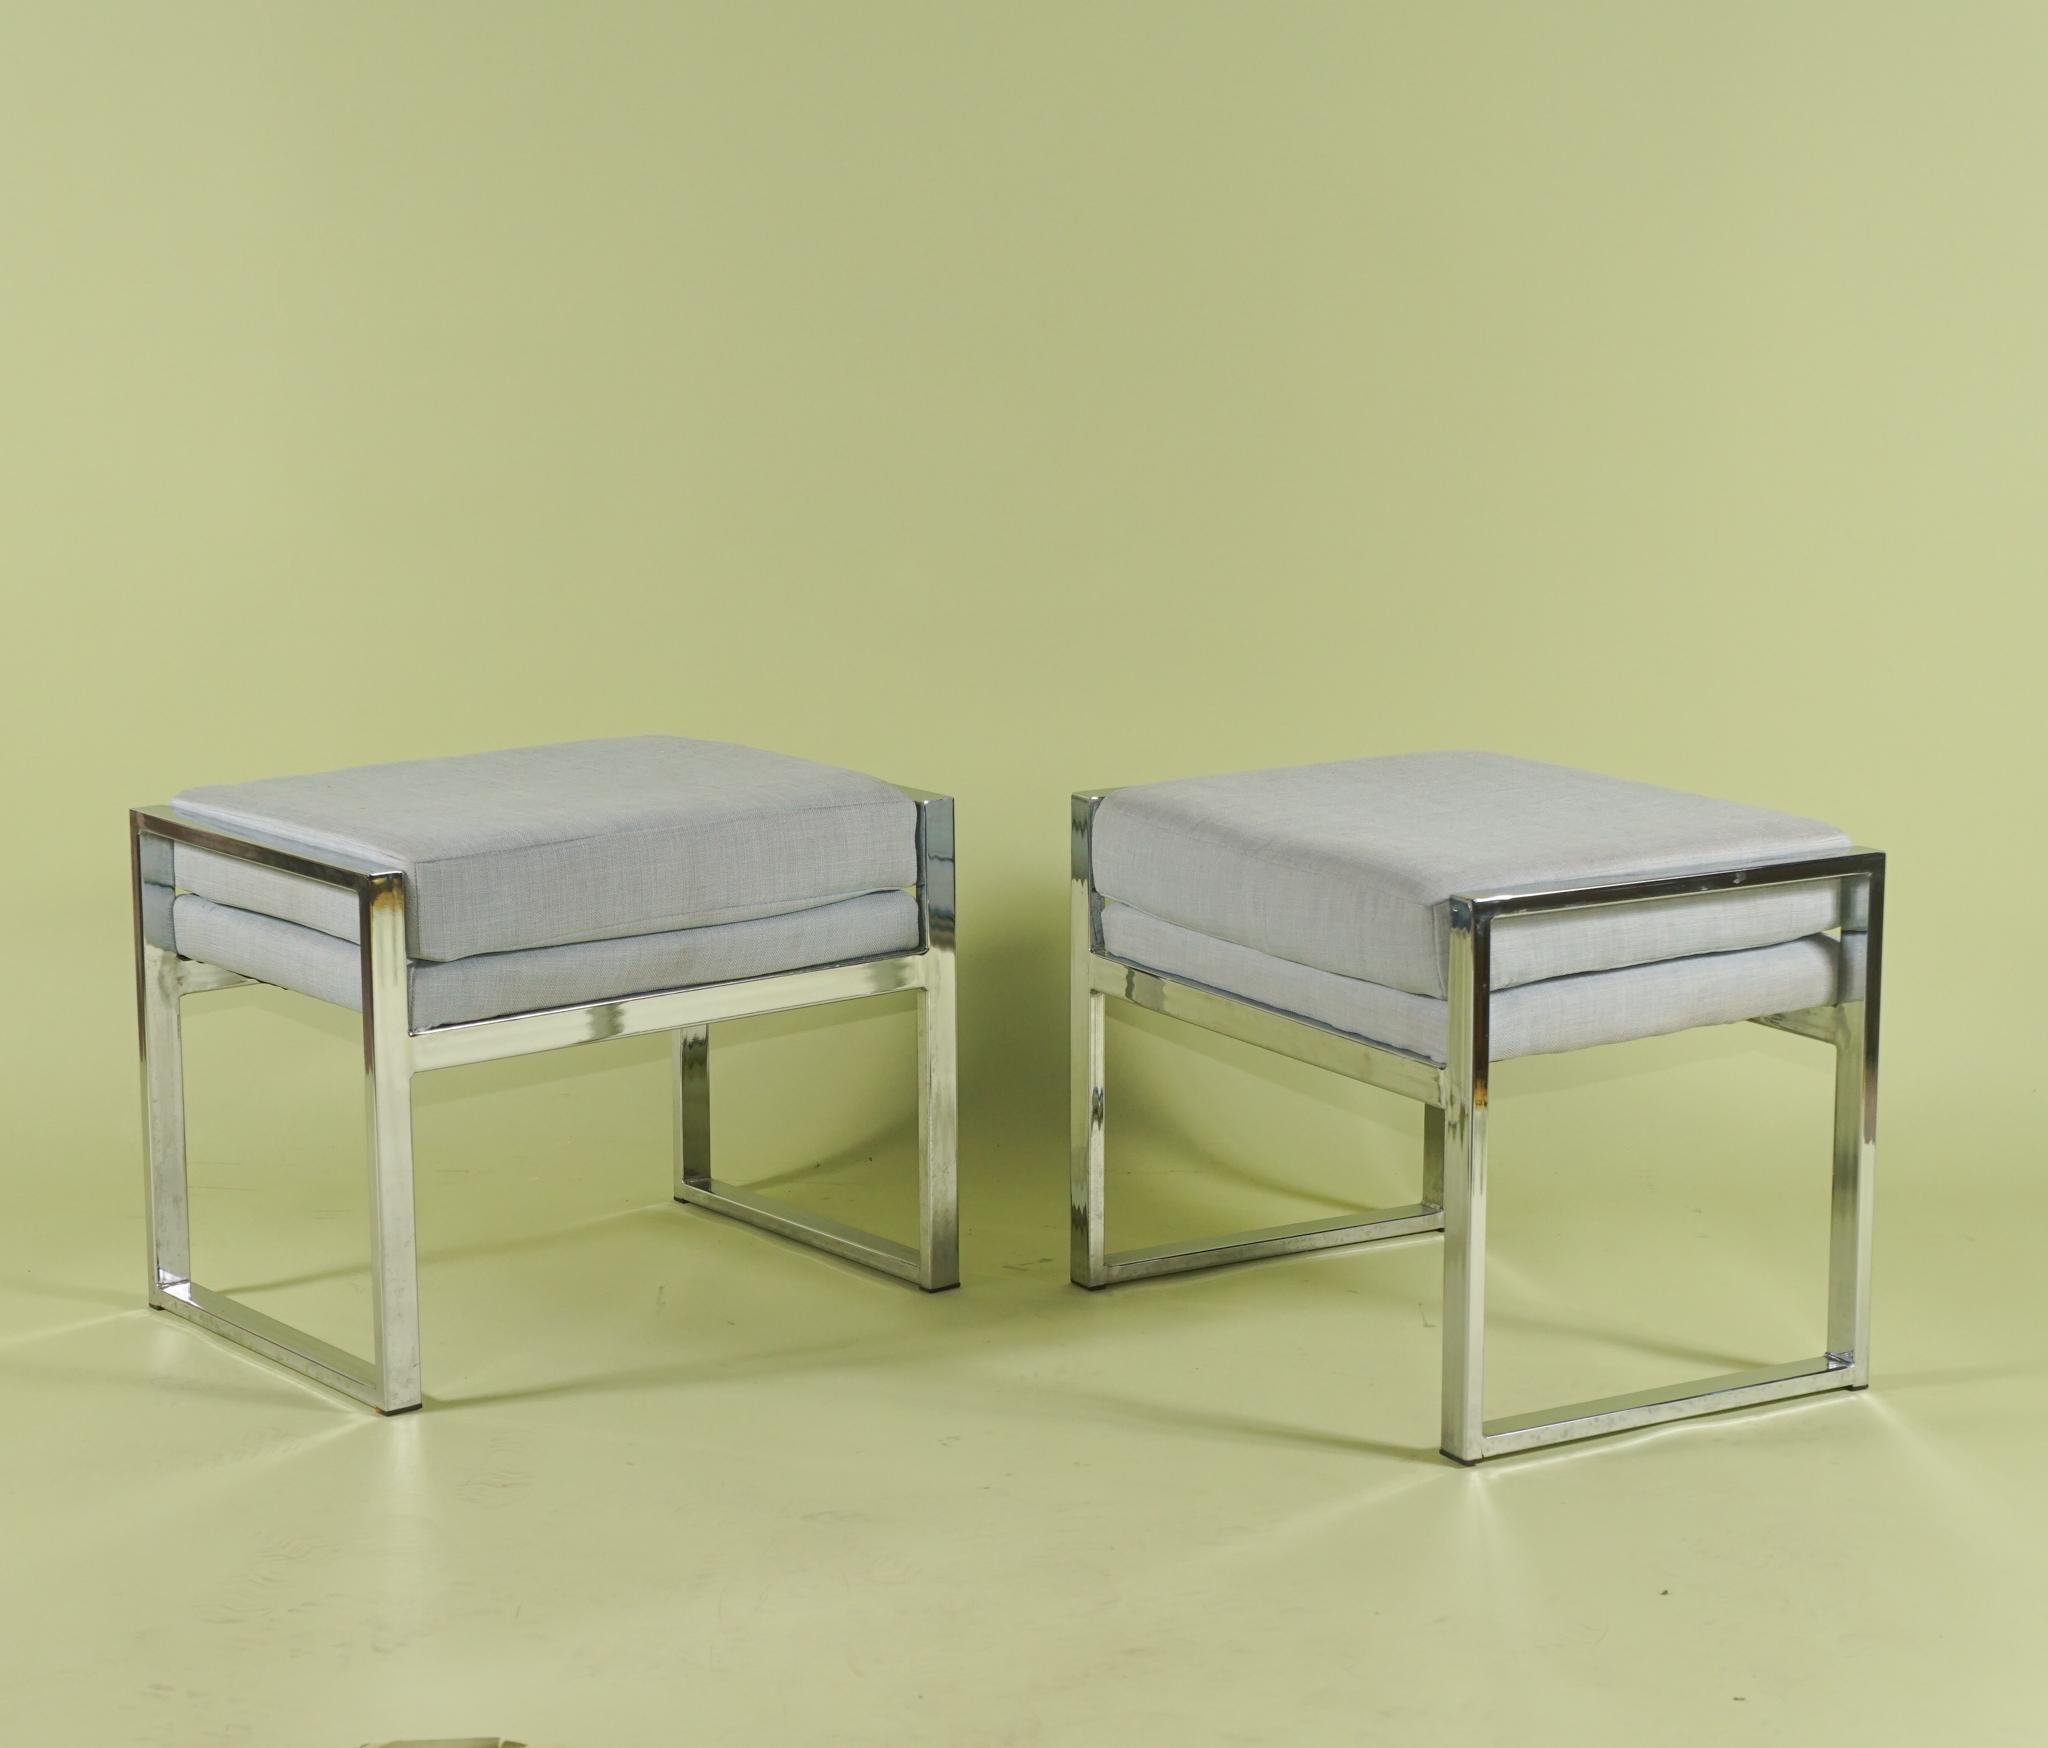 This pair of stools are made of chromed steel and the upholstered seats are easy to remove and cover if so desired. Created in the style of Milo Baughman one of the period's most prolific designers and most associated with his work for Thayer Coggin